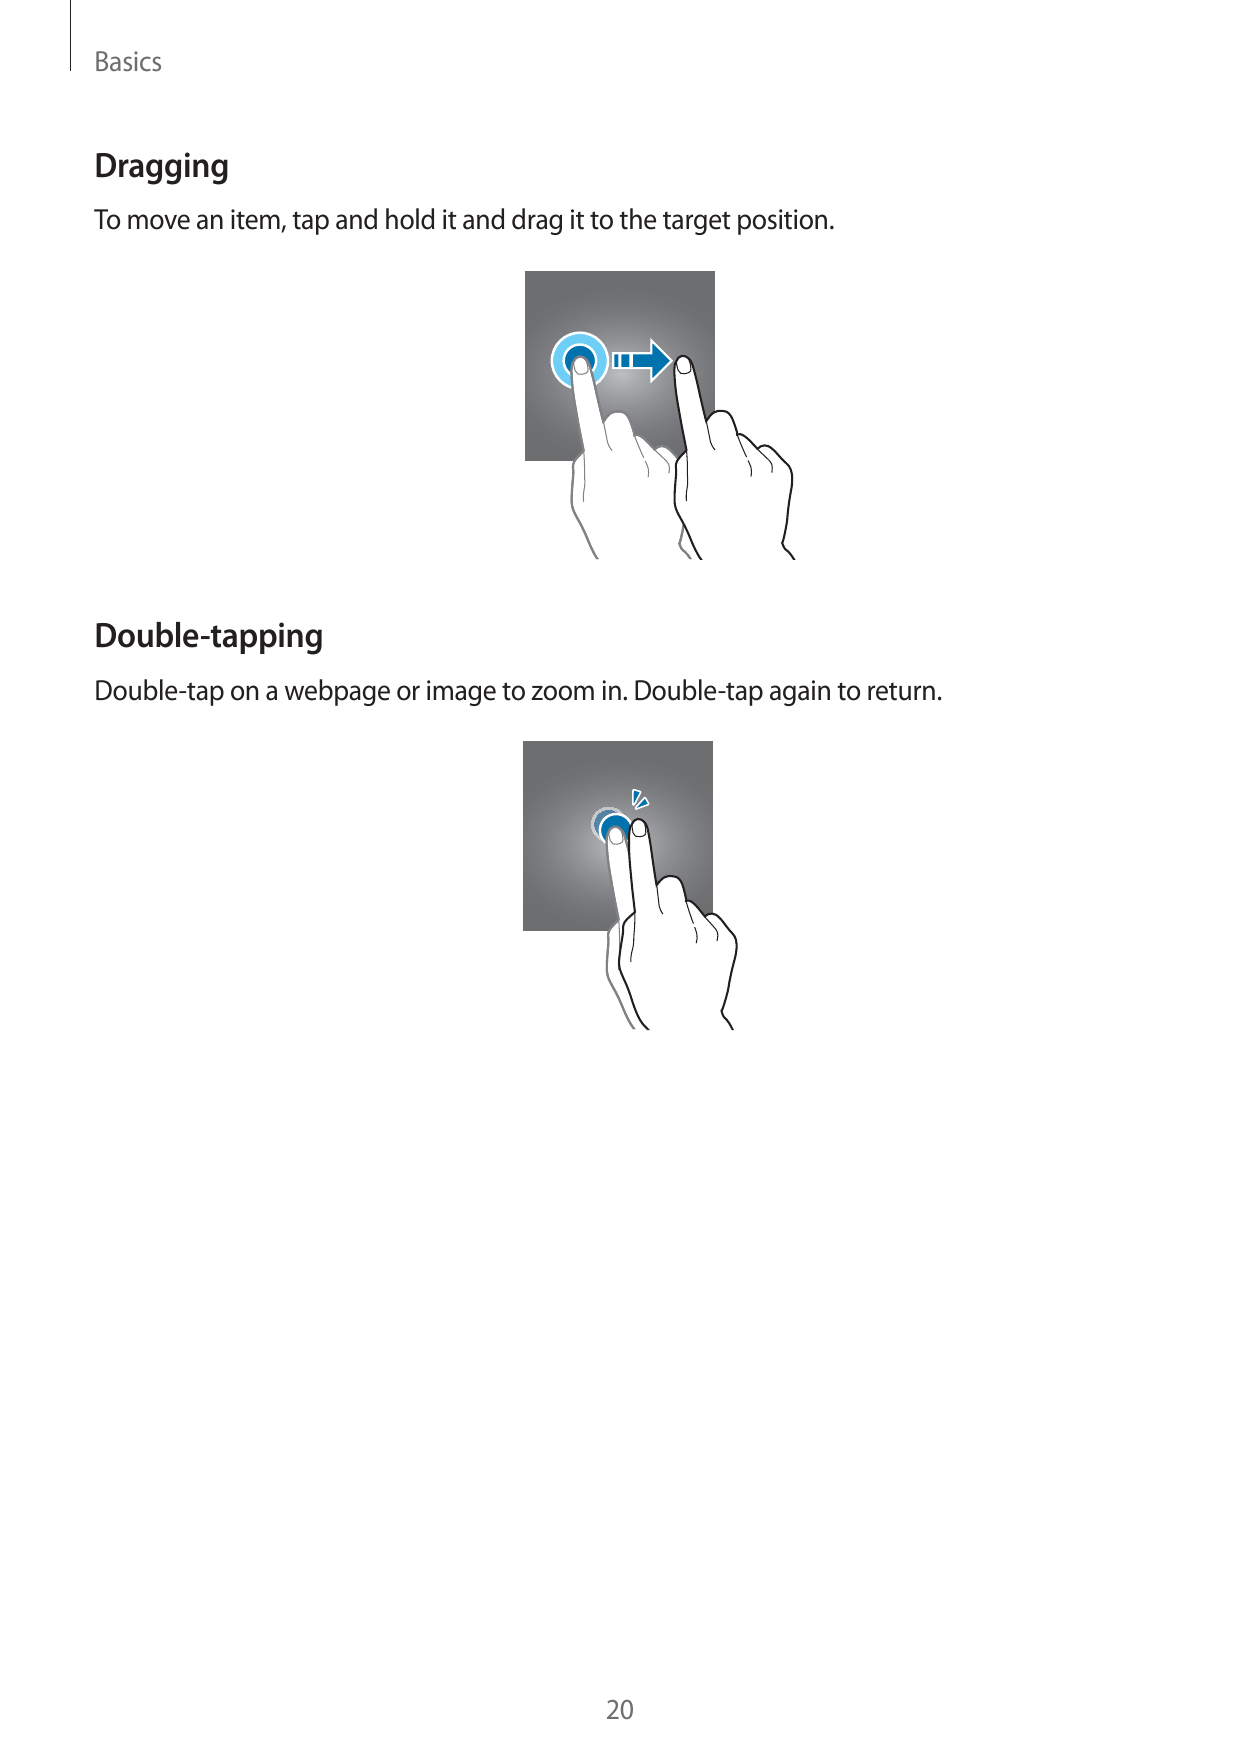 BasicsDraggingTo move an item, tap and hold it and drag it to the target position.Double-tappingDouble-tap on a webpage or image